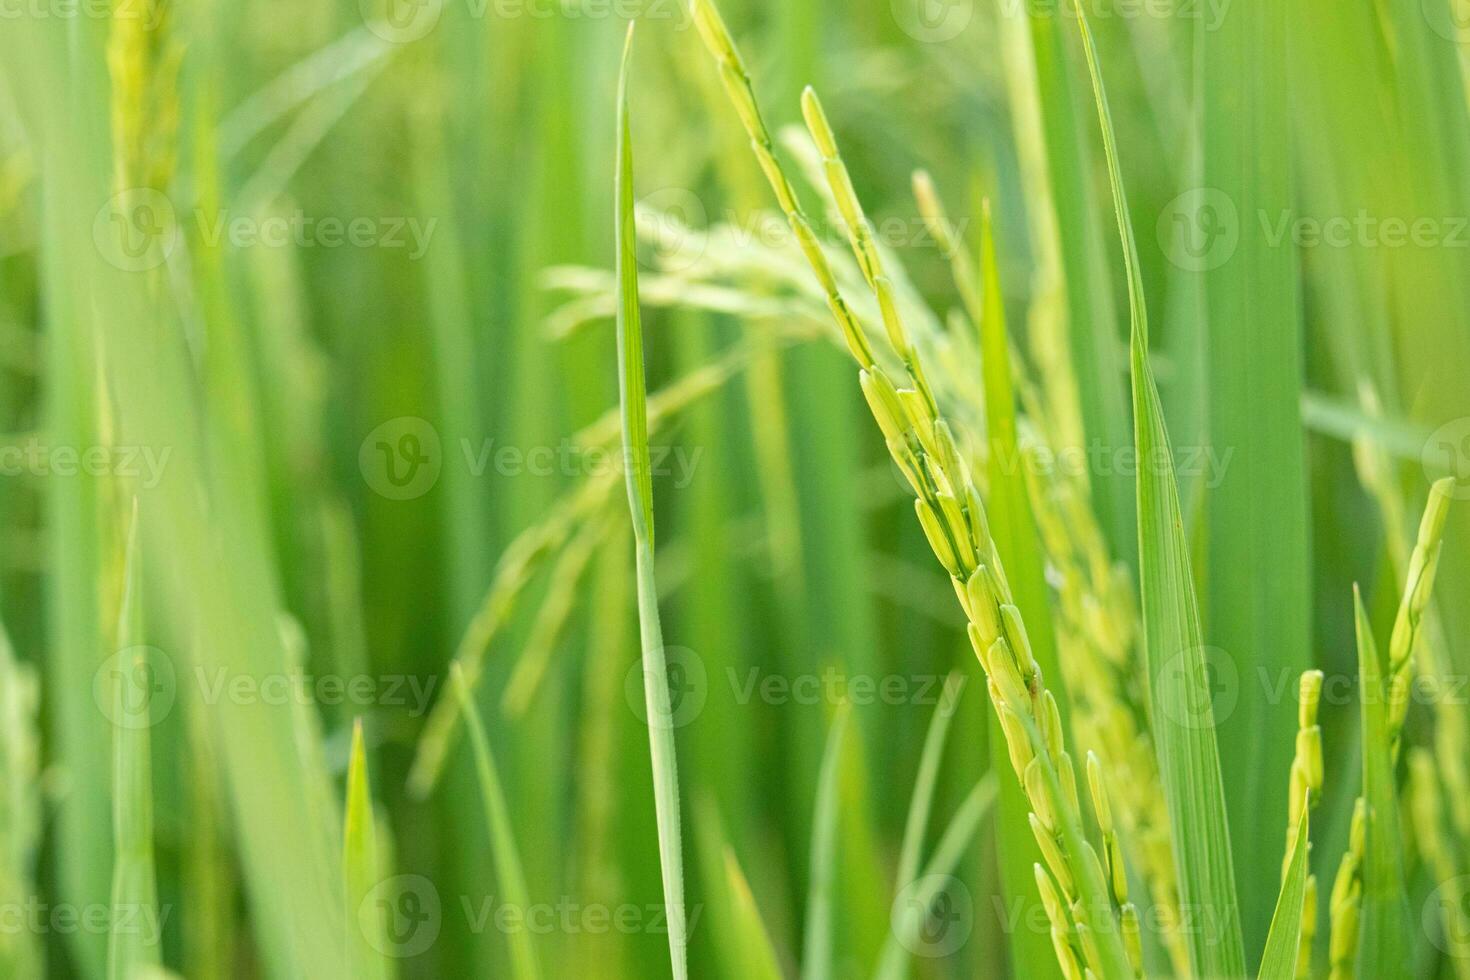 The greenery rice field, agriculture grain farming photo